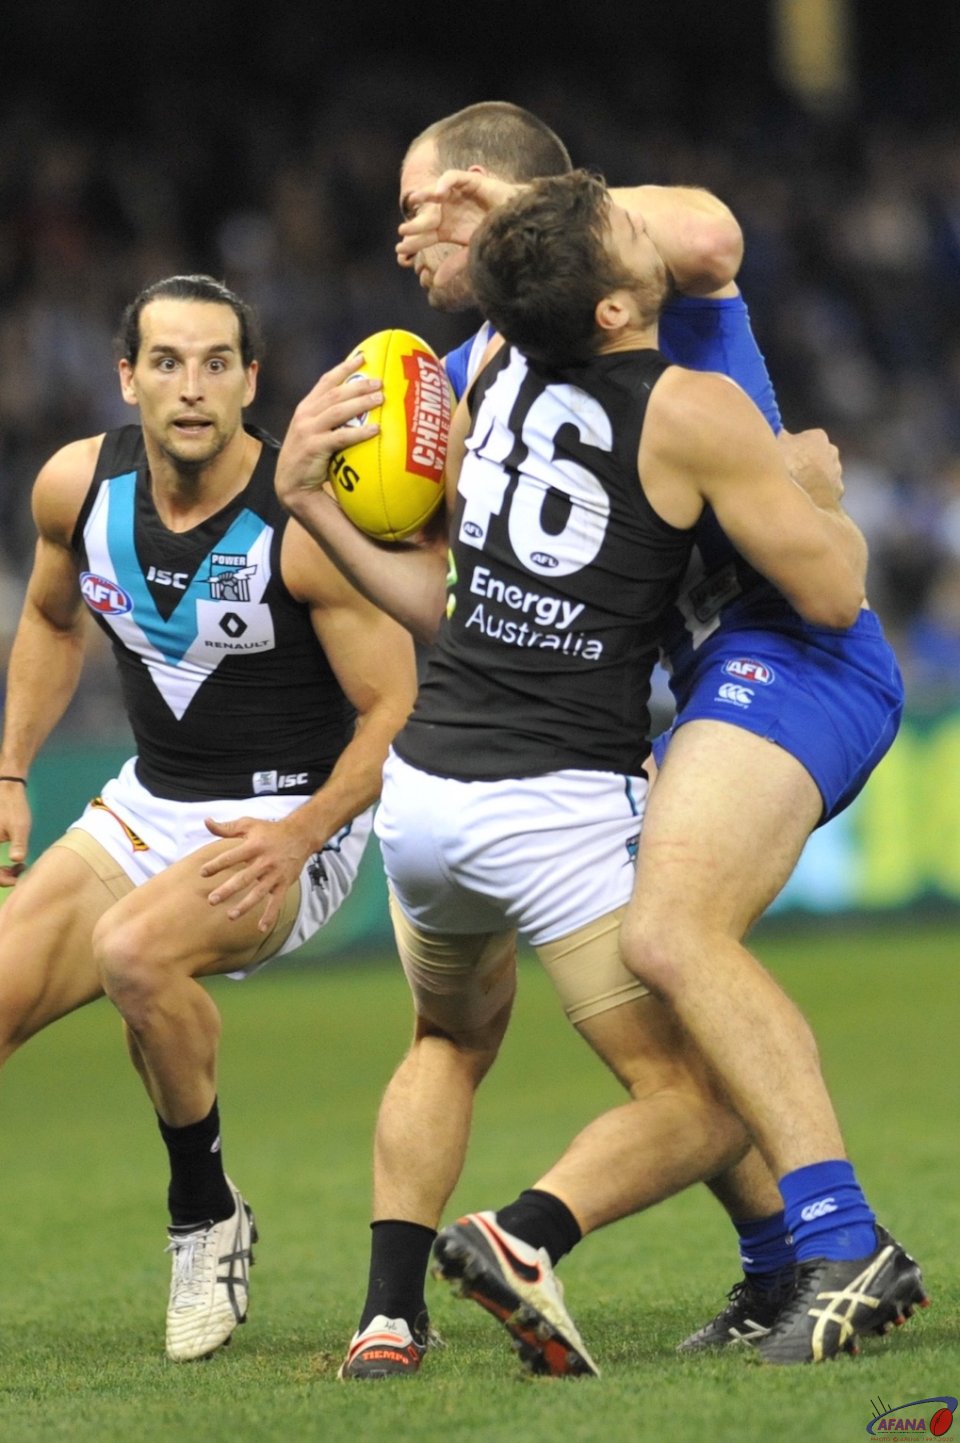 Ben Cunnington gives Sam Gray a solid fend off